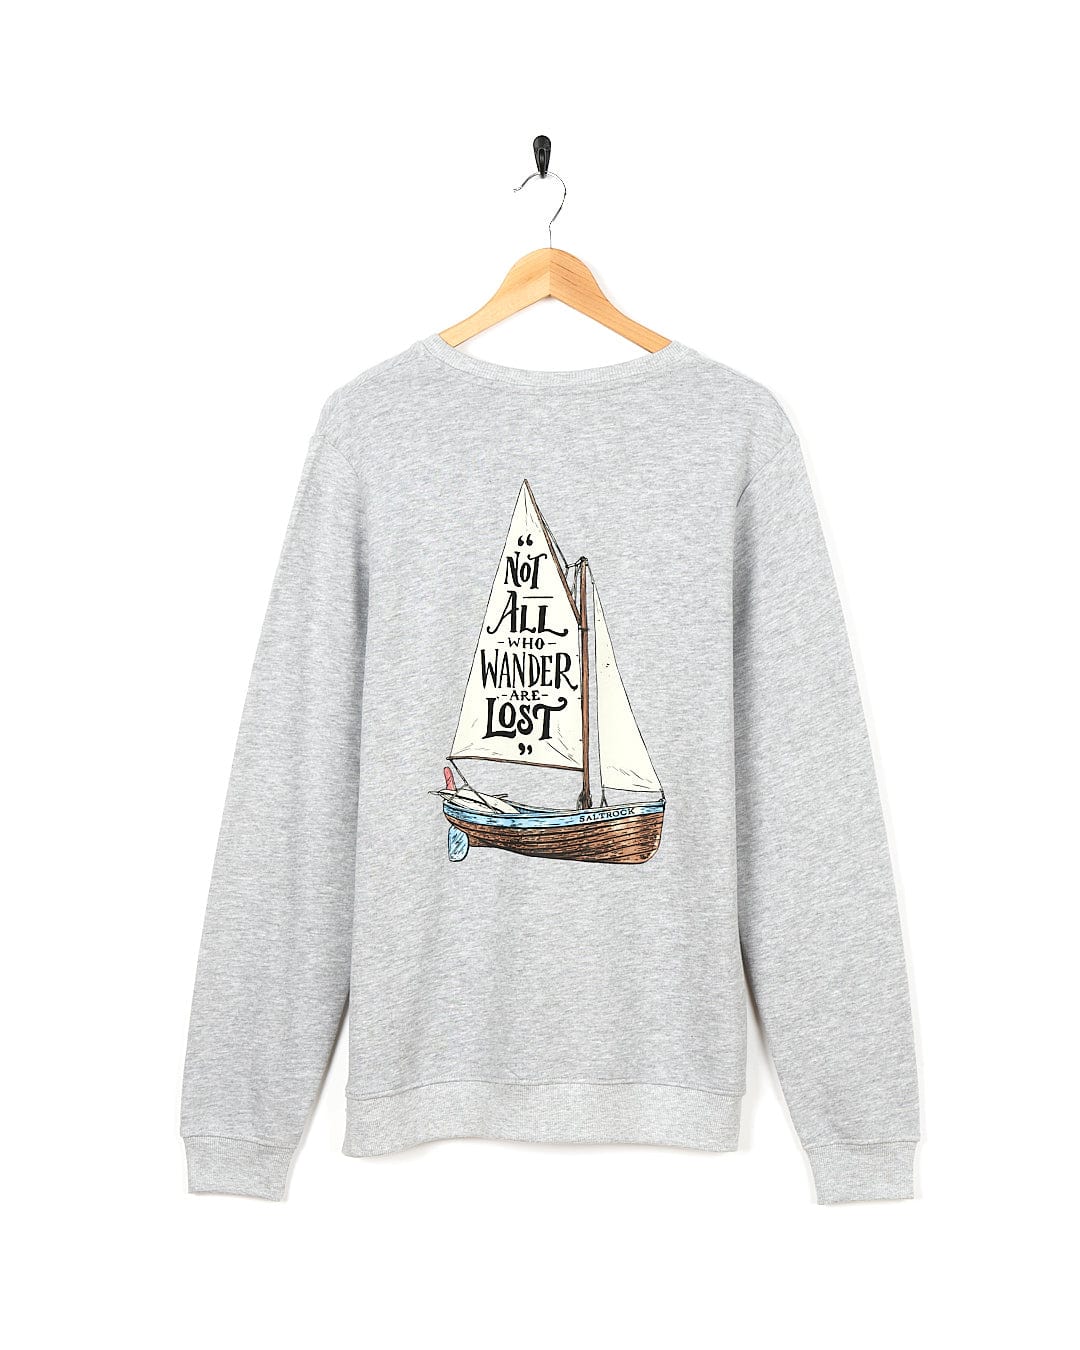 A Lost Ships - Mens Crew Sweat - Grey sweatshirt with a sailboat on it by Saltrock.